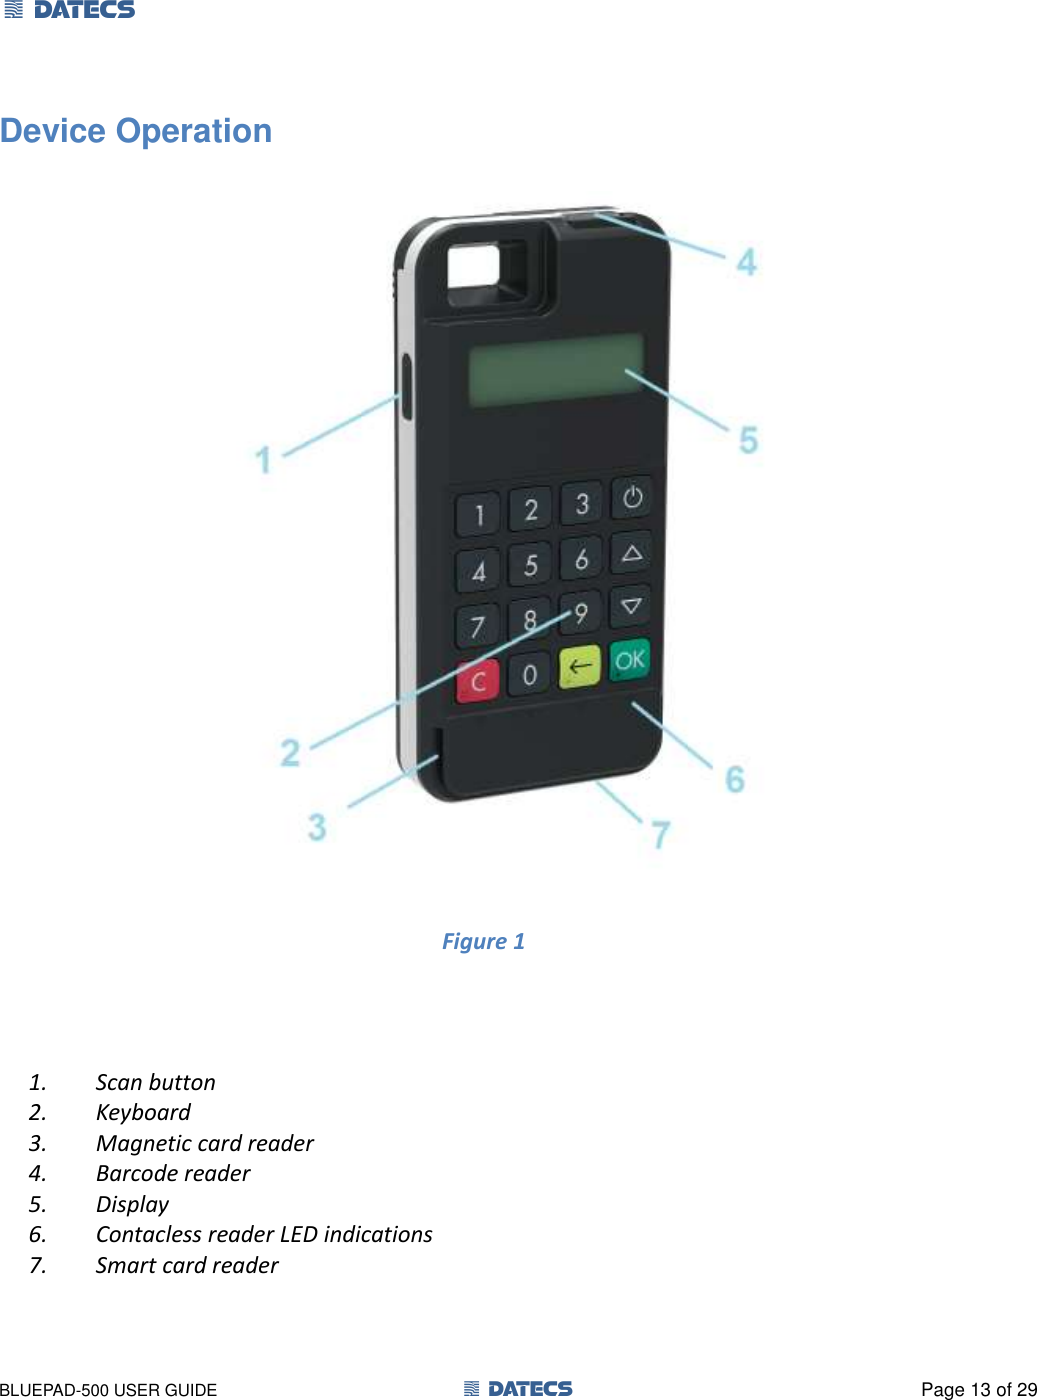 1 DATECS       BLUEPAD-500 USER GUIDE  1 DATECS  Page 13 of 29 Device Operation   Figure 1              1. Scan button 2. Keyboard 3. Magnetic card reader 4. Barcode reader 5. Display 6. Contacless reader LED indications 7. Smart card reader     